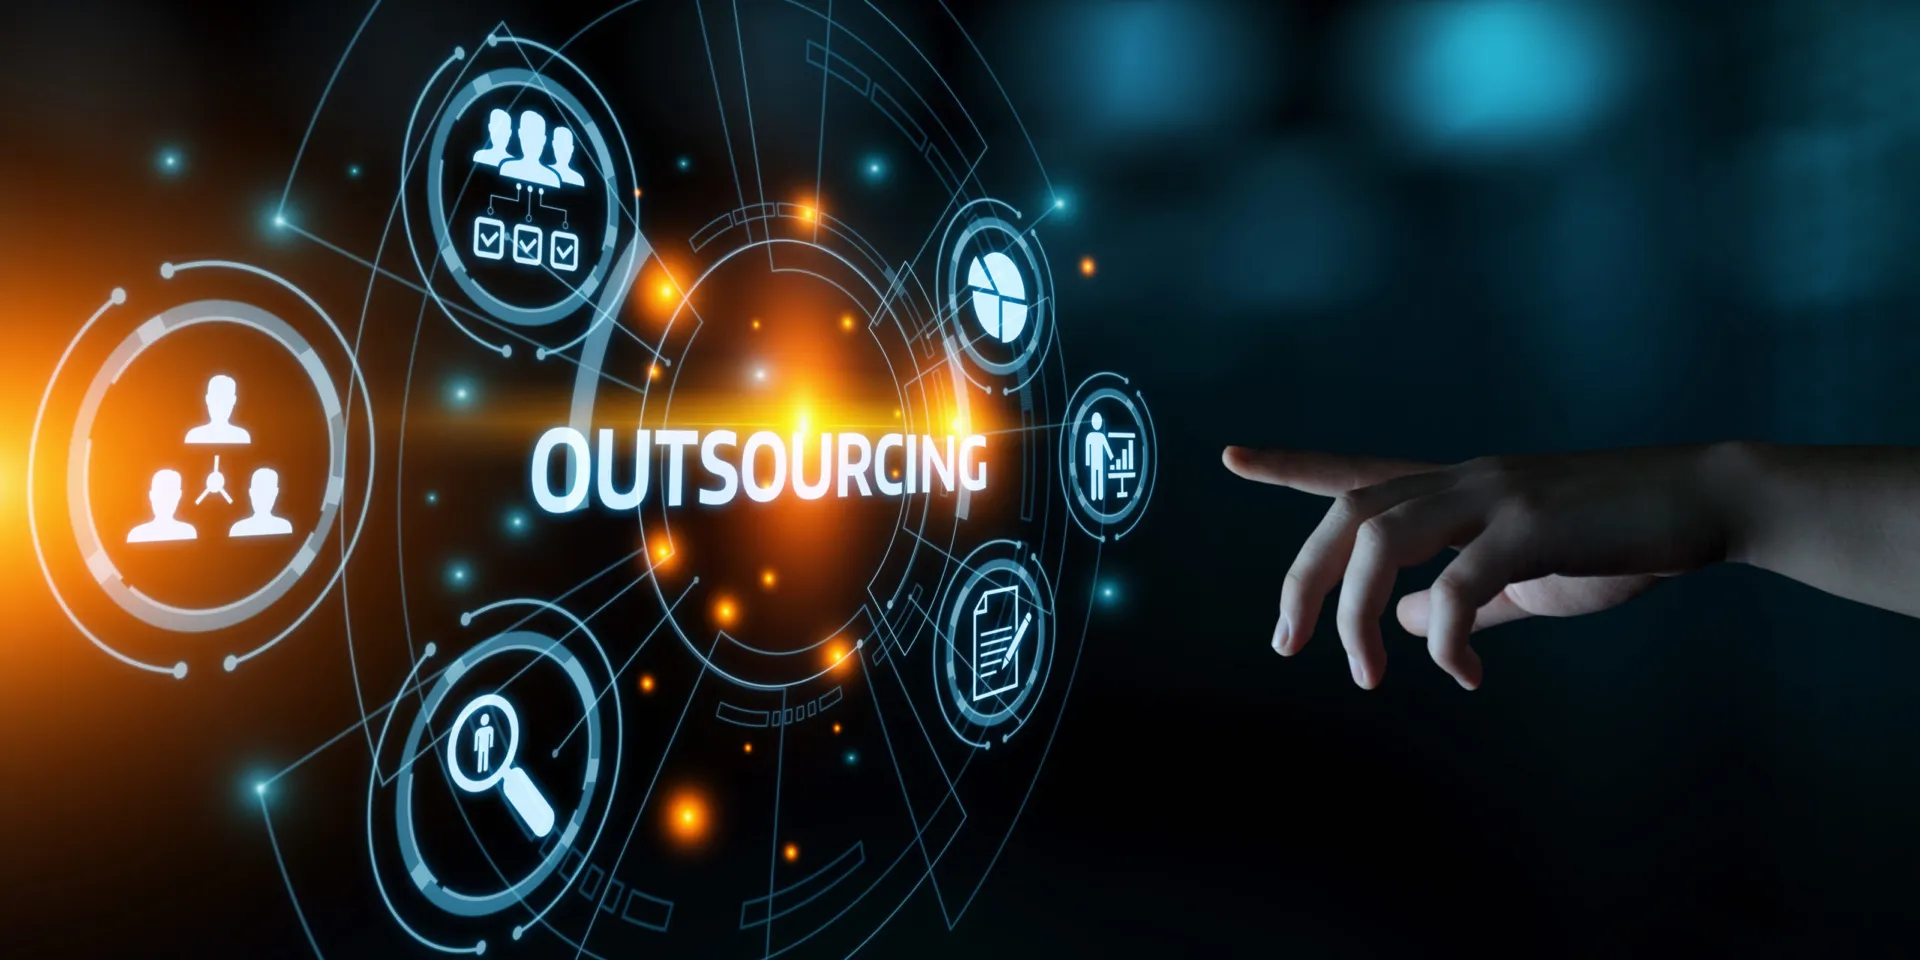 Why you should outsource your mobile app development